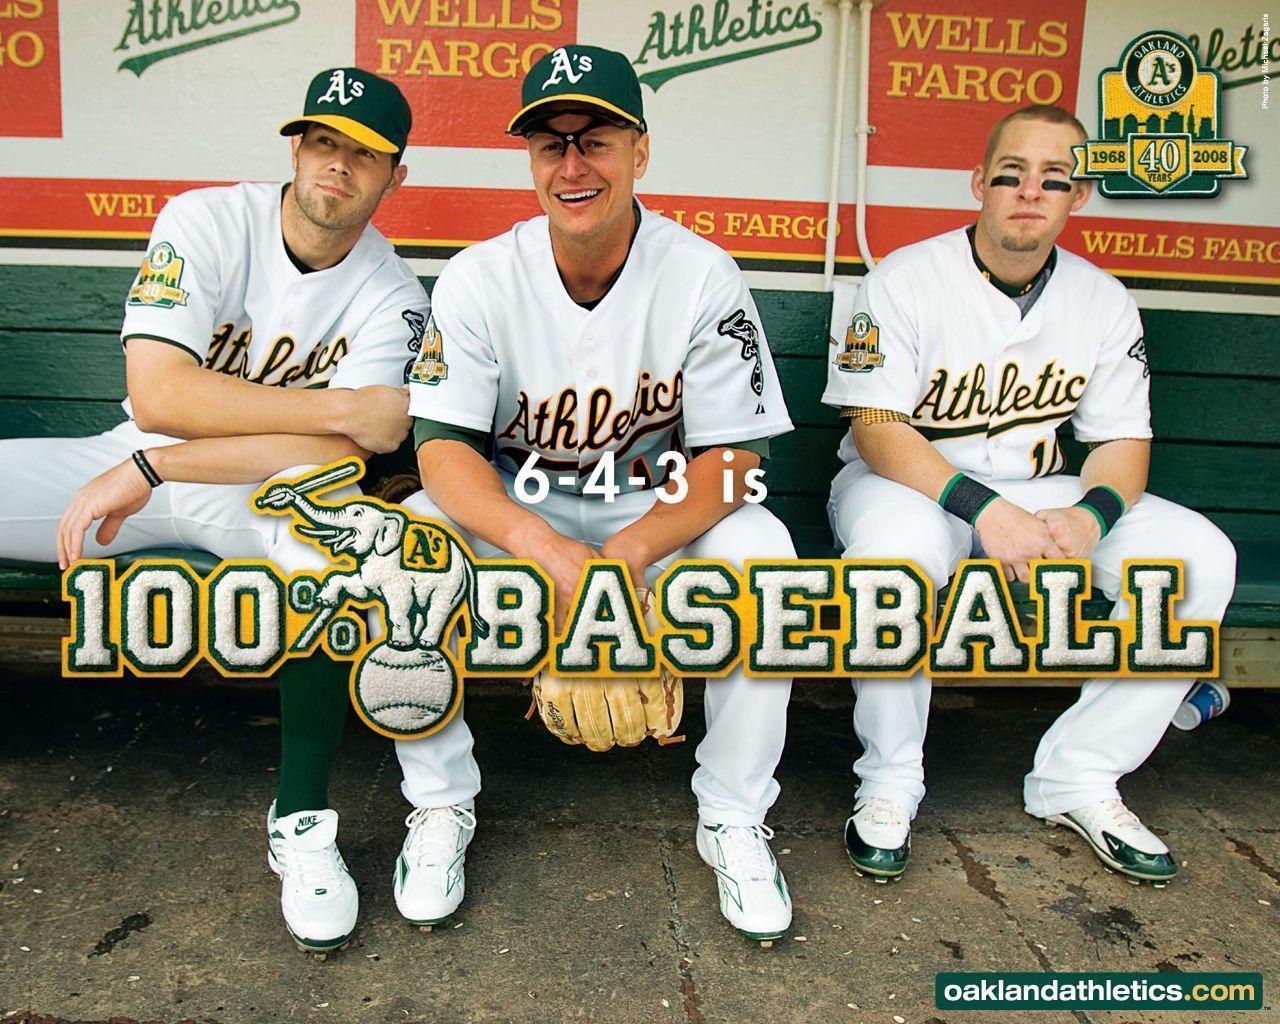 Best image about ¡¡¡¡Oakland A's!!!!!. Baseball